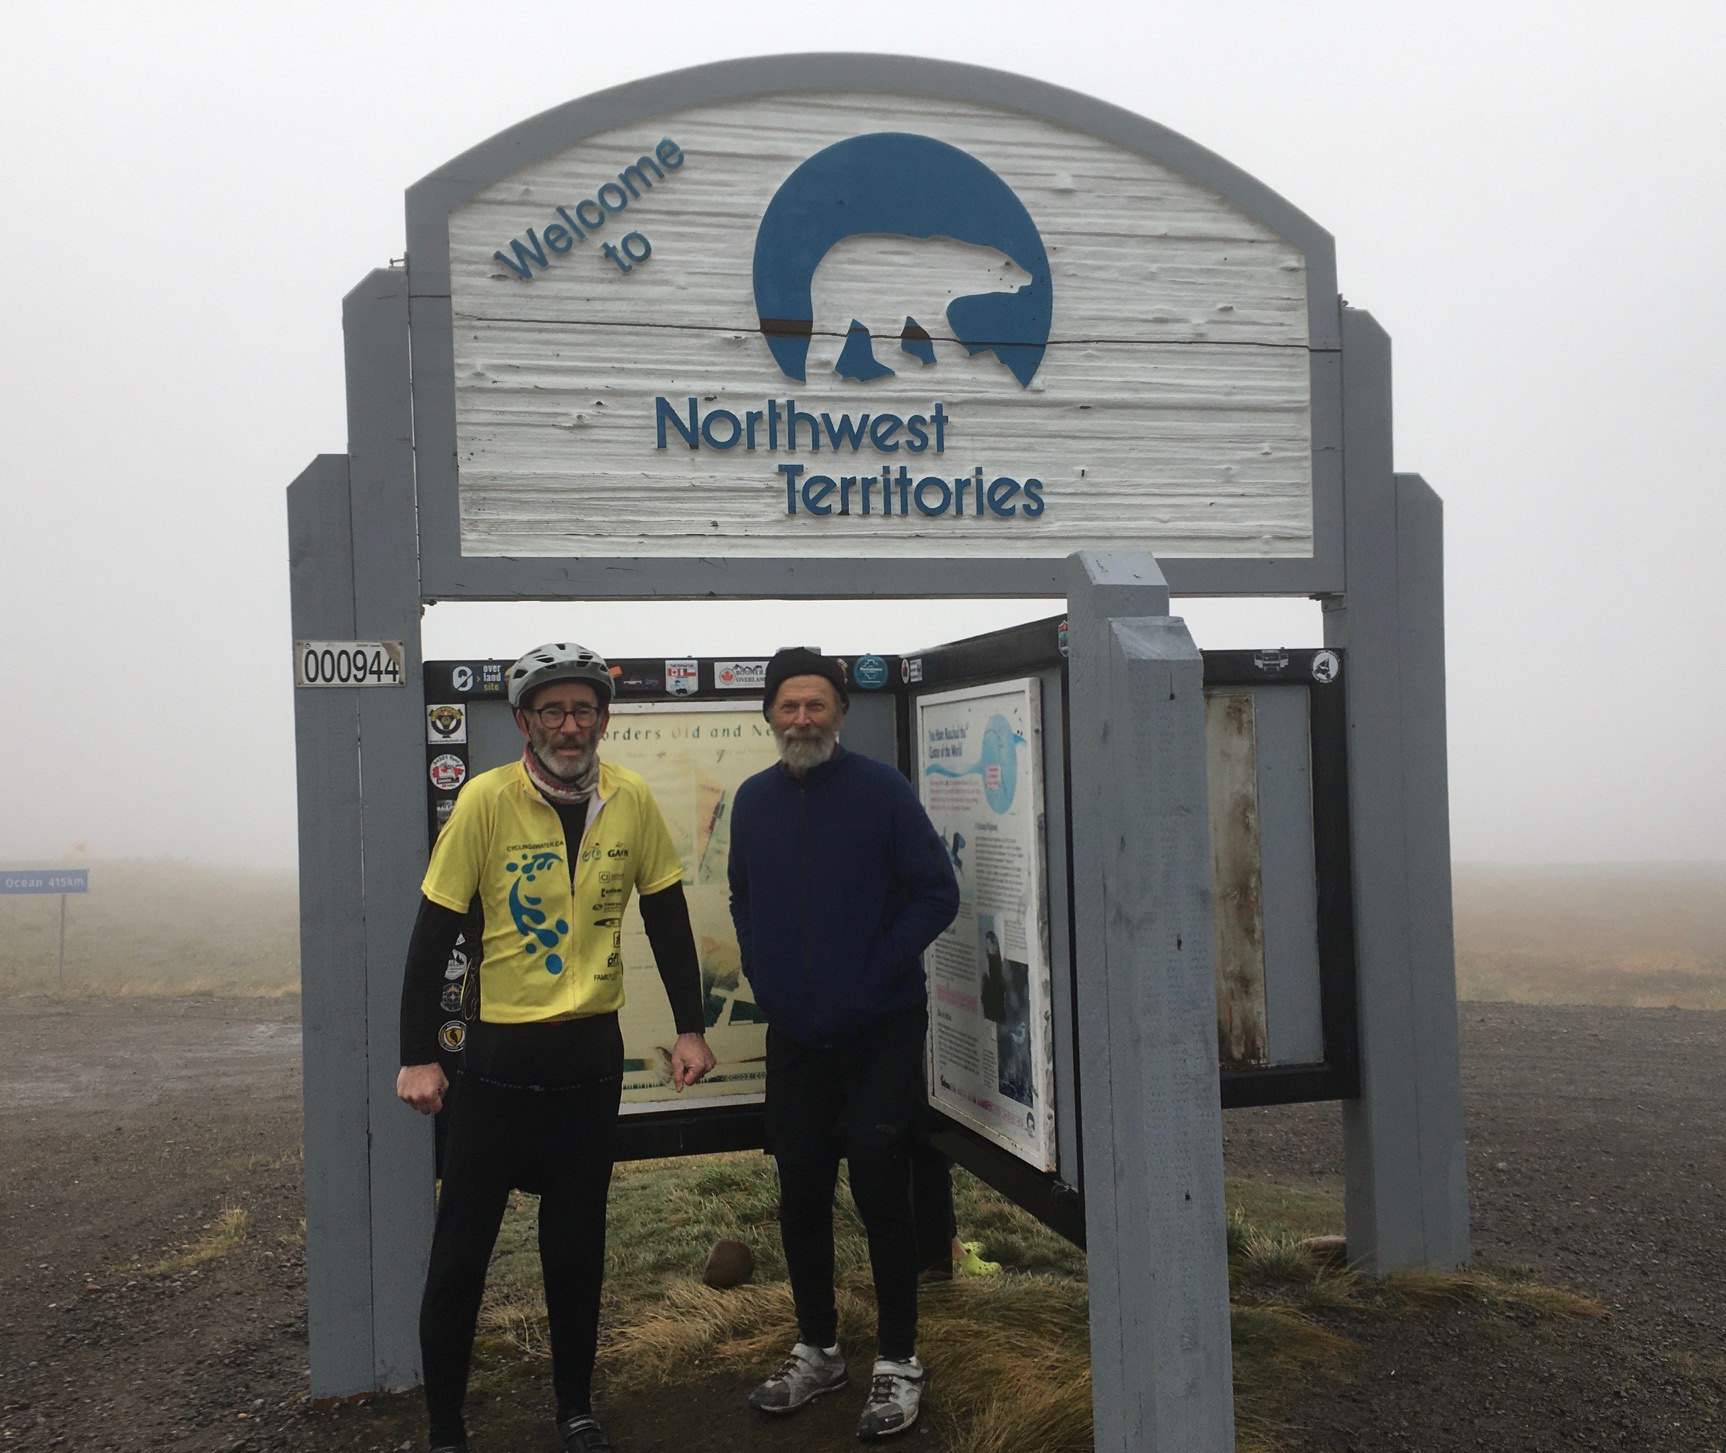 Day 10: Dempster Highway – 19 KM… Disappointing Day!